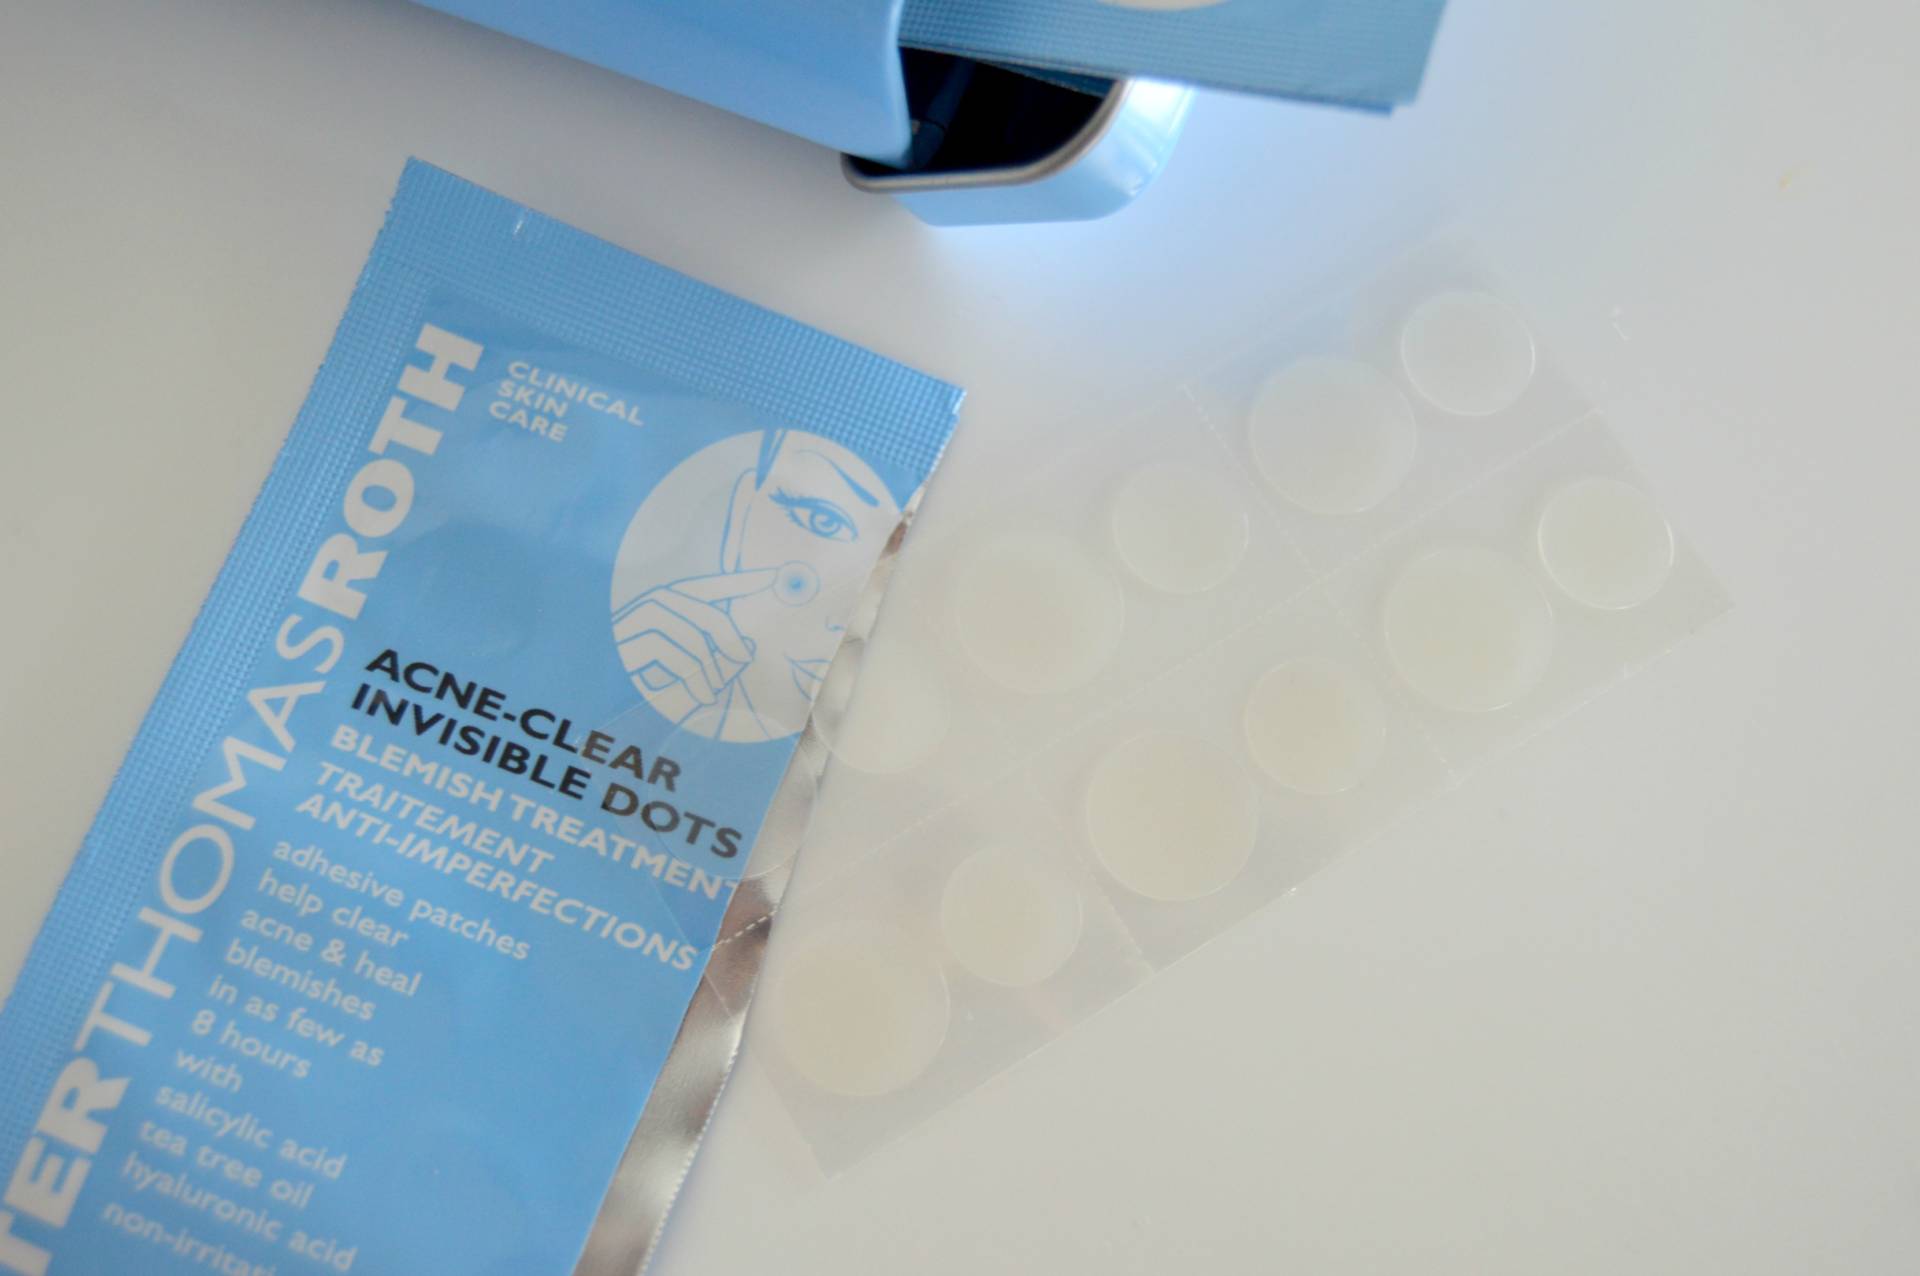 peter-thomas-rogth-acne-clear-invisible-dots-review-inhautepursuit